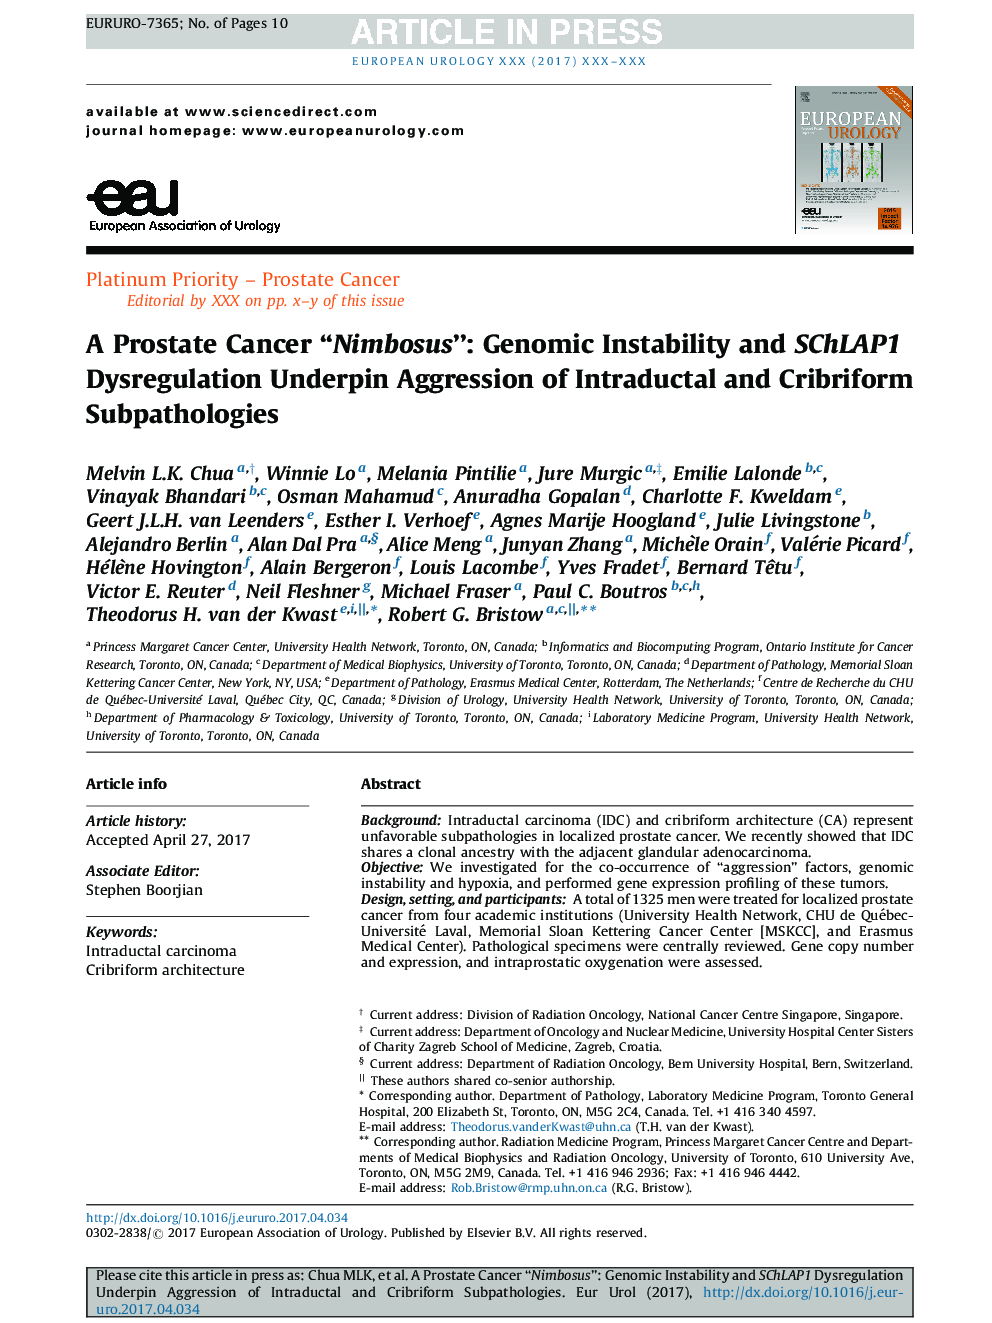 A Prostate Cancer “Nimbosus”: Genomic Instability and SChLAP1 Dysregulation Underpin Aggression of Intraductal and Cribriform Subpathologies